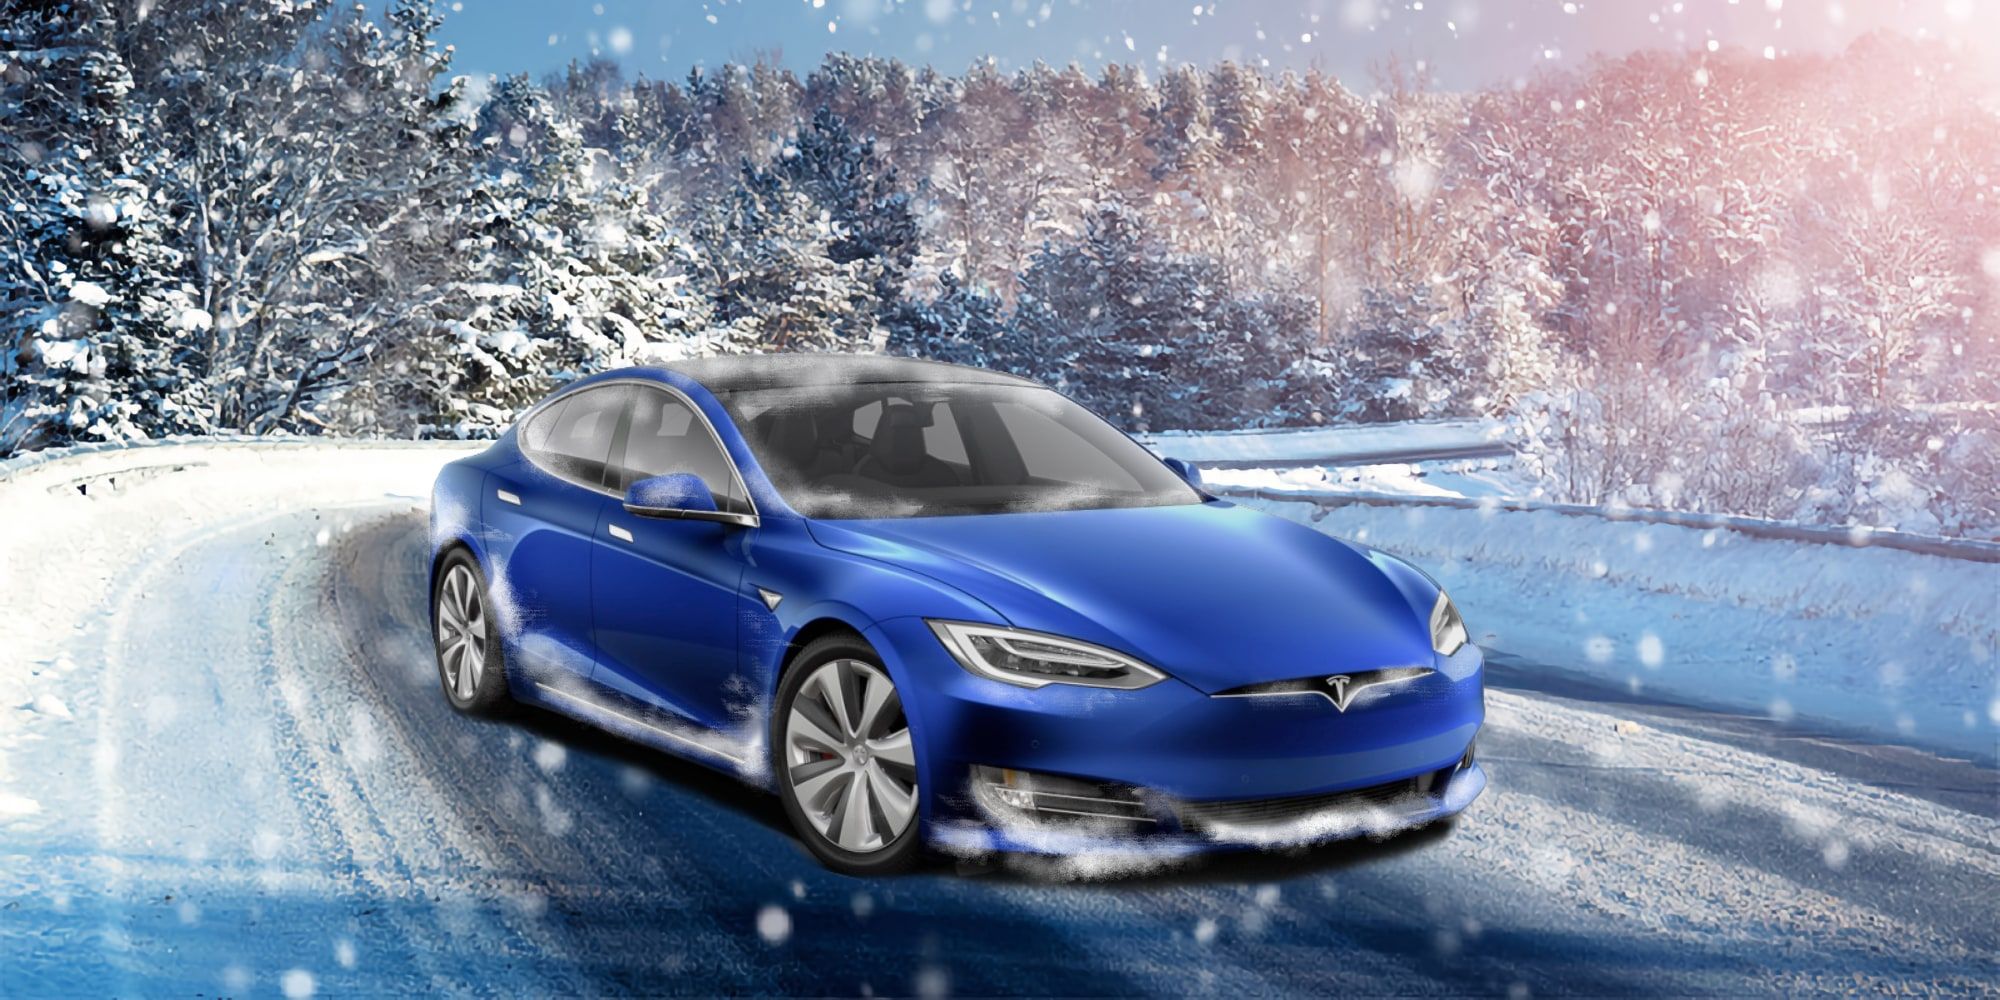 Frosty Blue Tesla Model S On A Snowy Highway Road Snow Cold